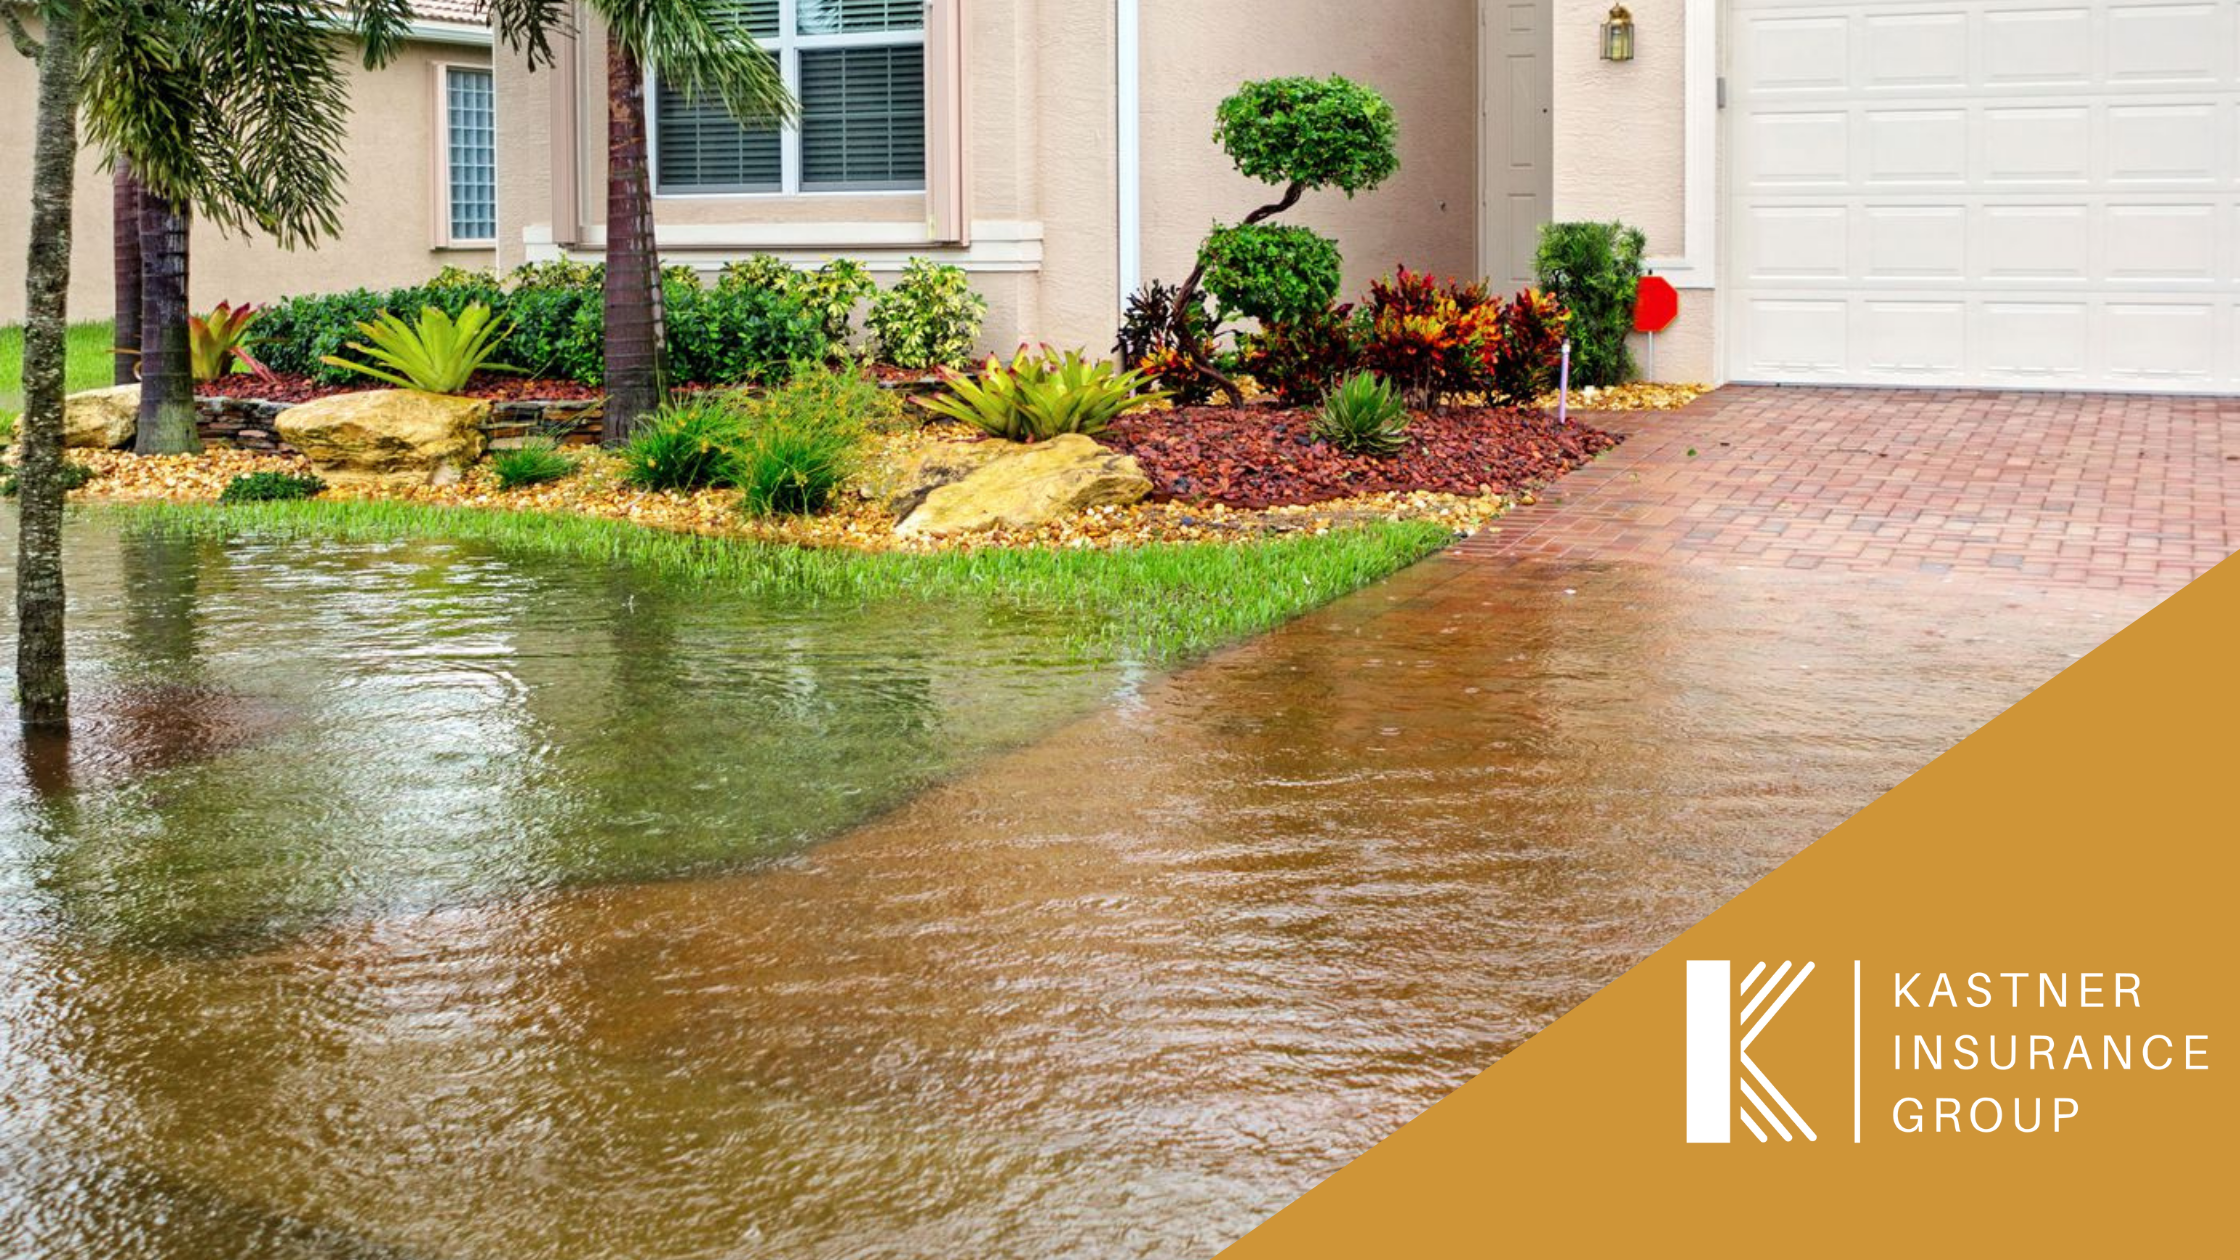 Flood 101: What You Need To Know About Flood Insurance